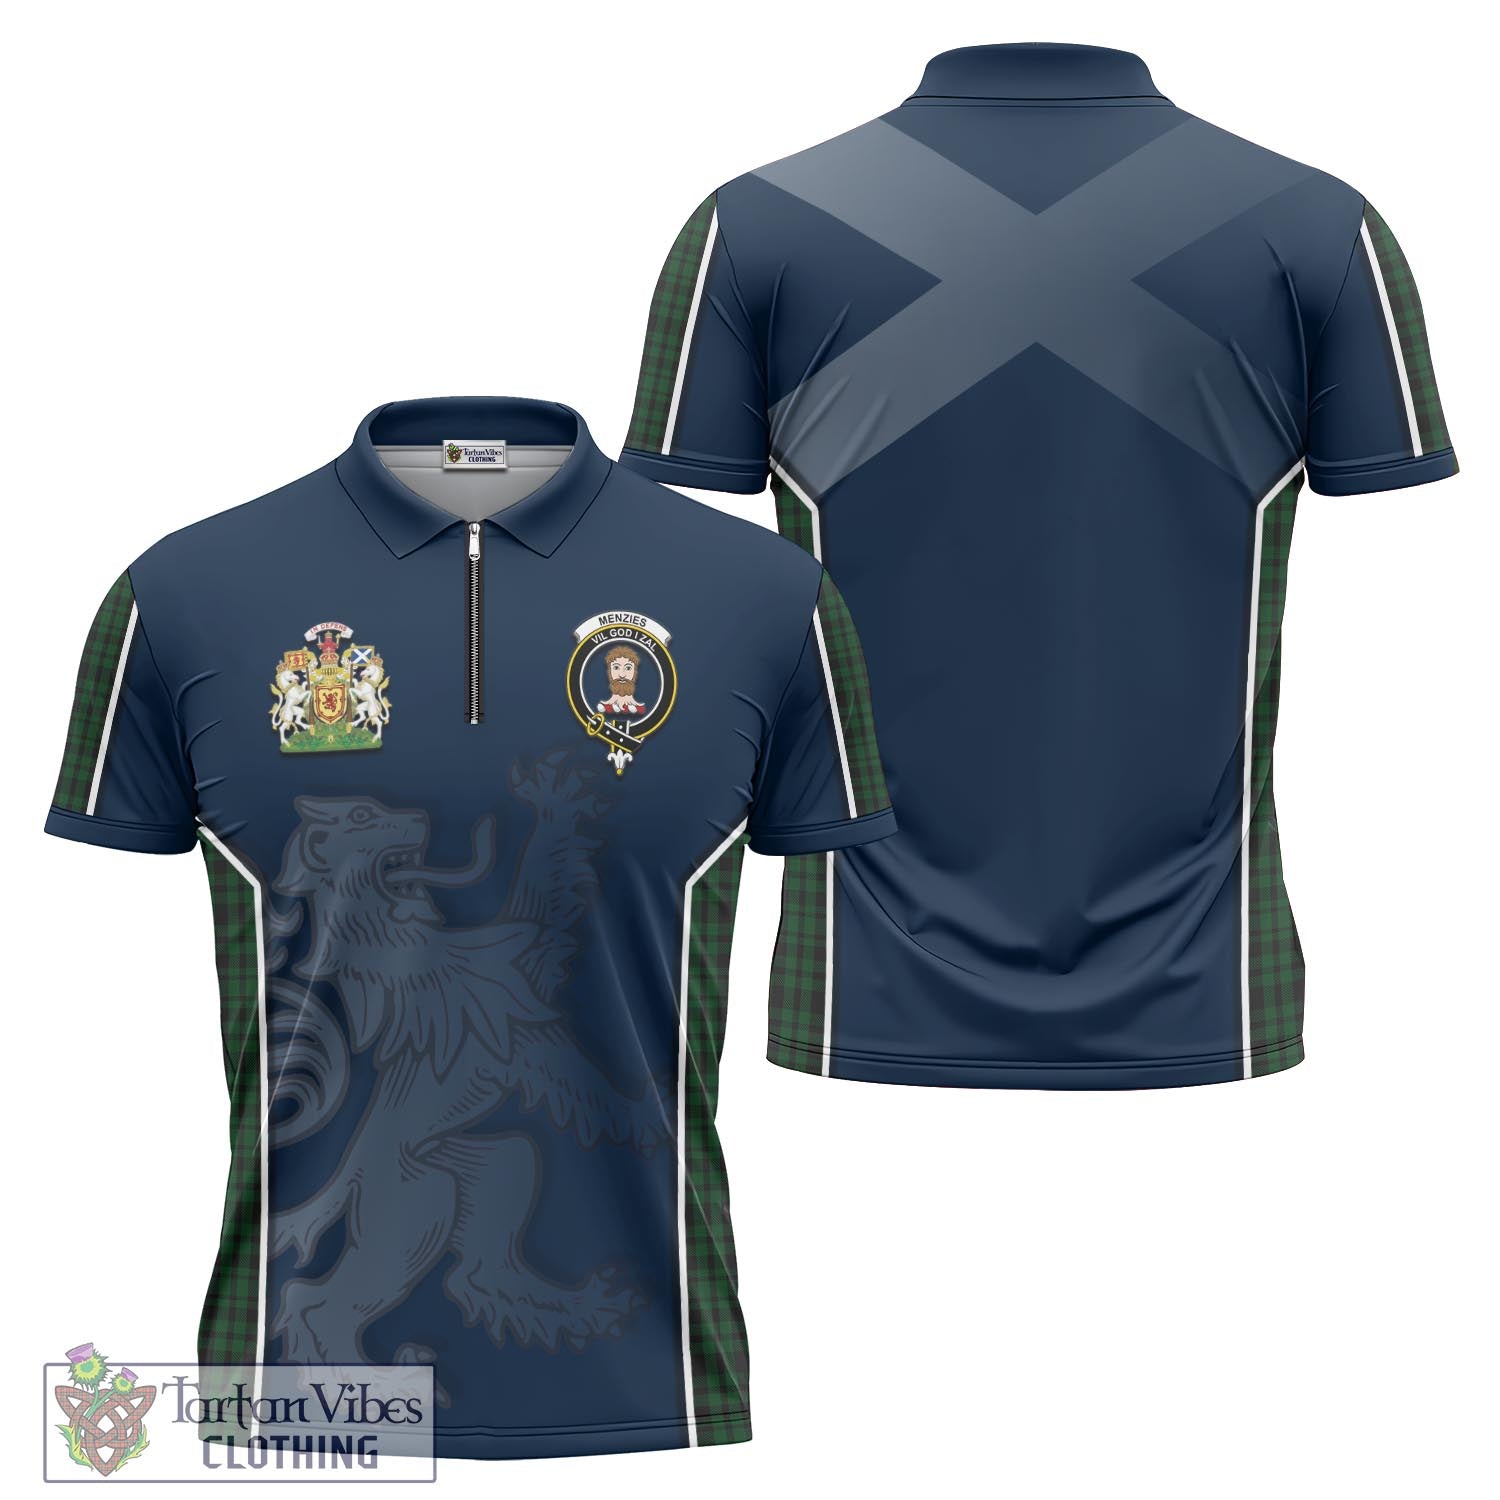 Tartan Vibes Clothing Menzies Green Tartan Zipper Polo Shirt with Family Crest and Lion Rampant Vibes Sport Style